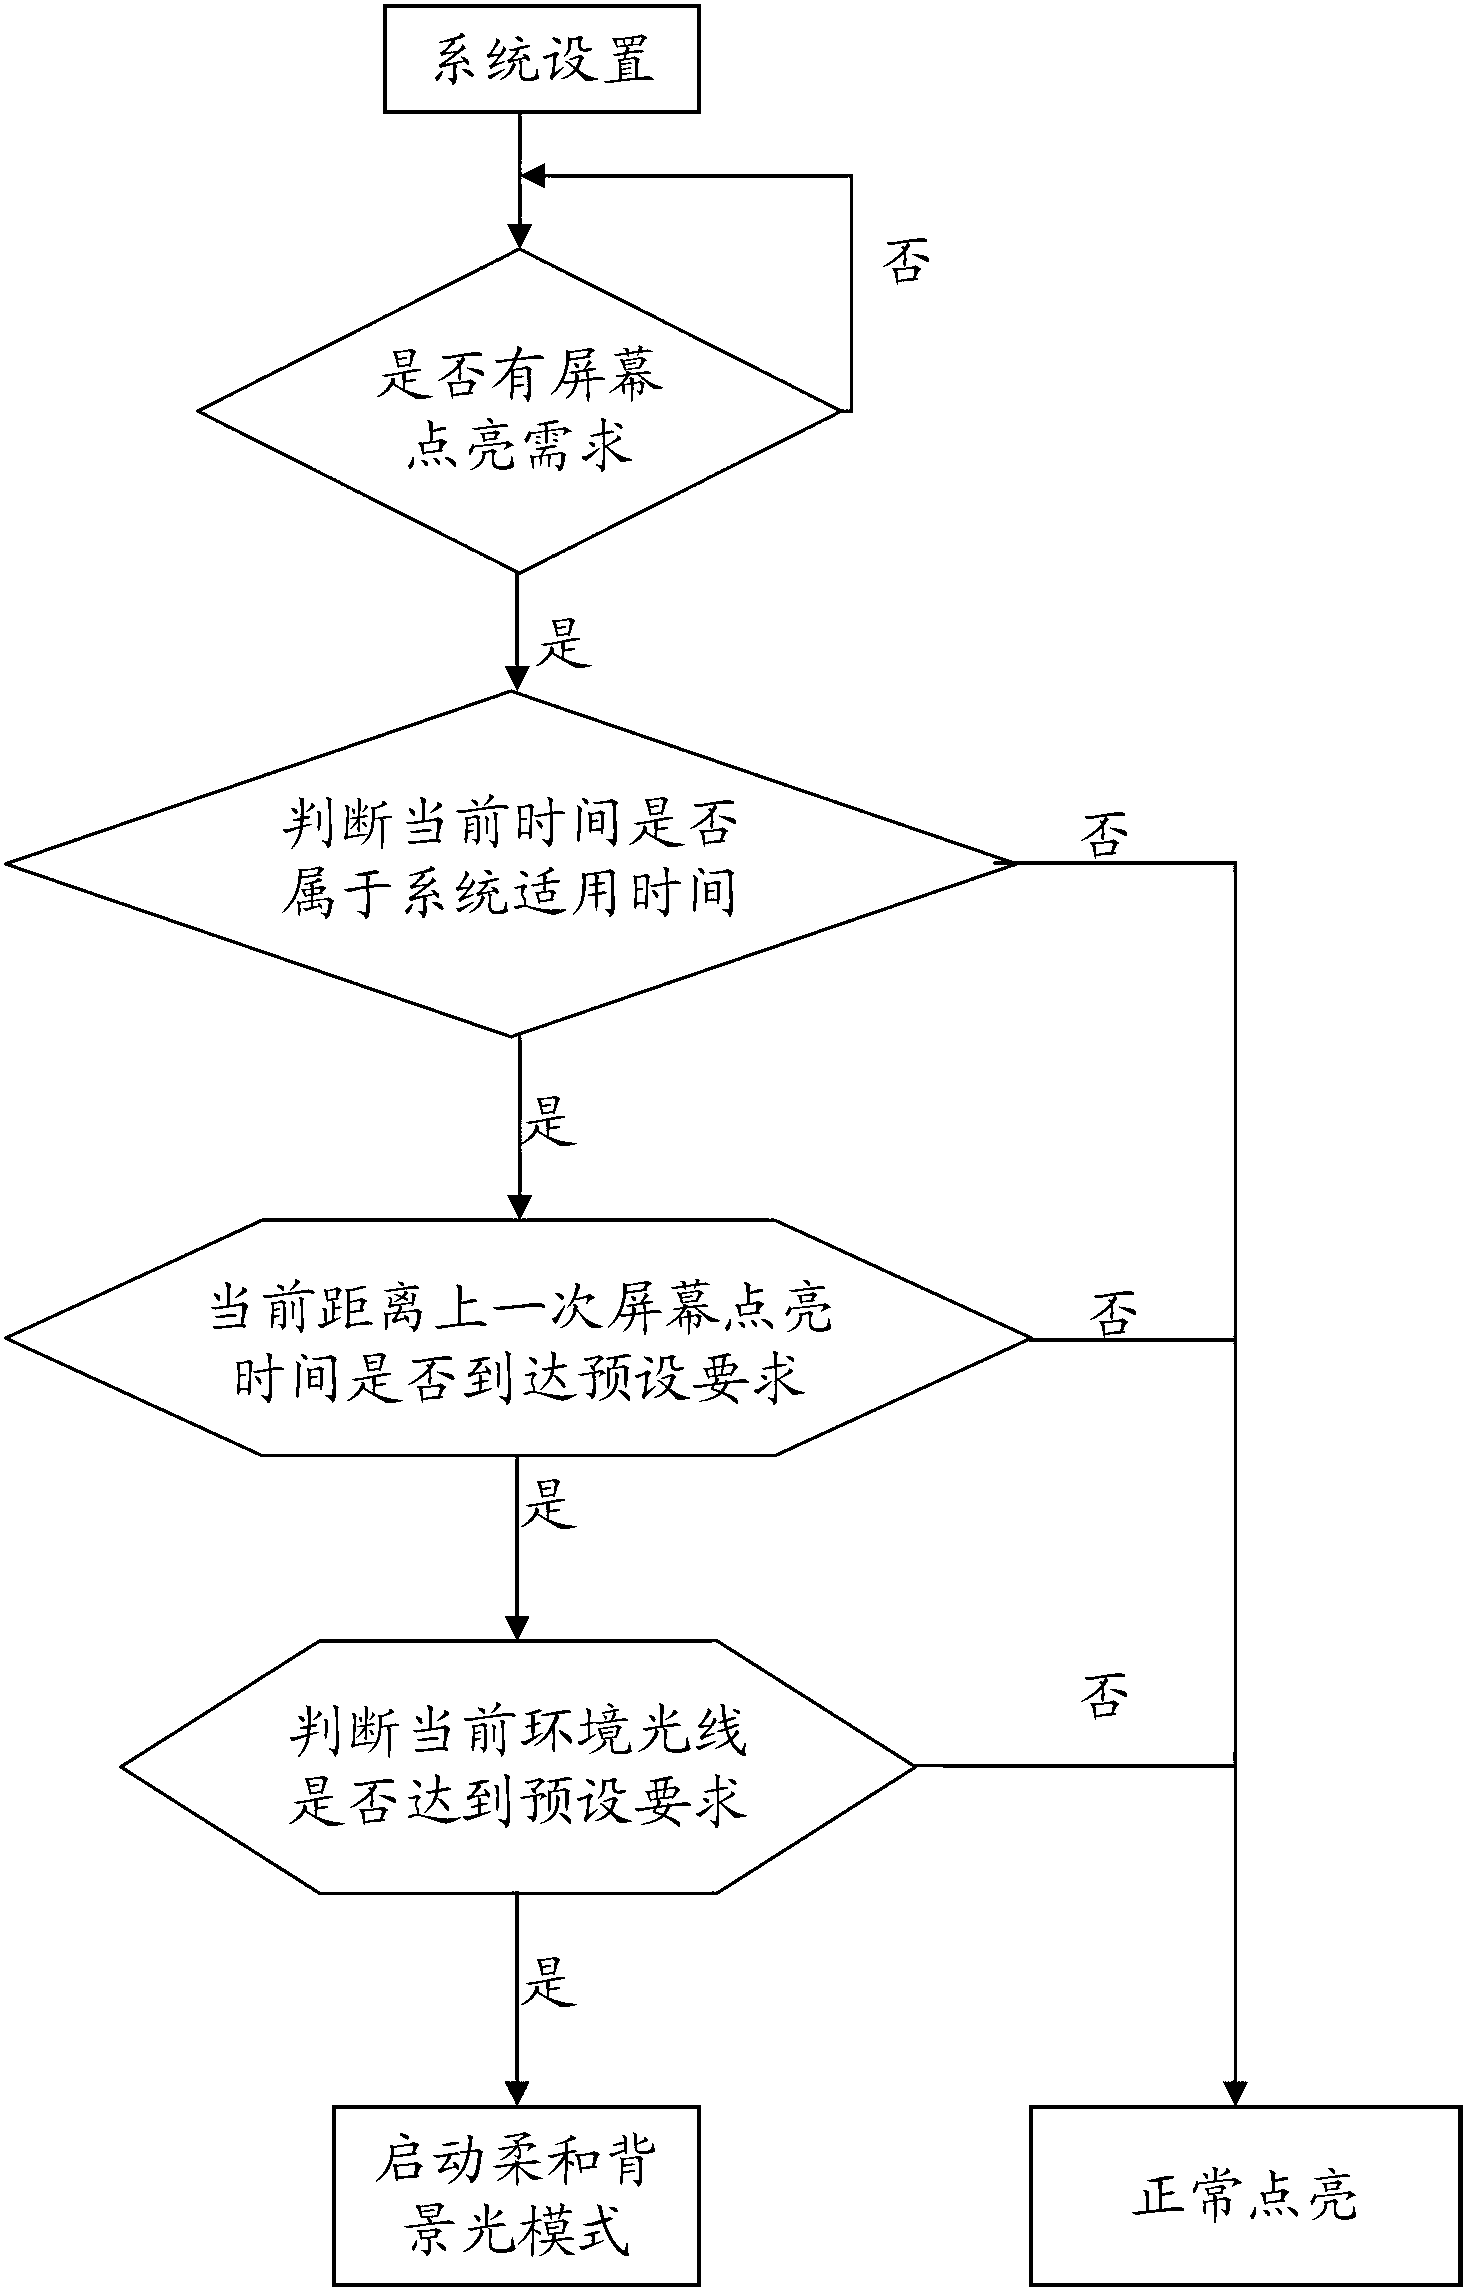 Mobile terminal with backlight intensity control system and backlight intensity control method